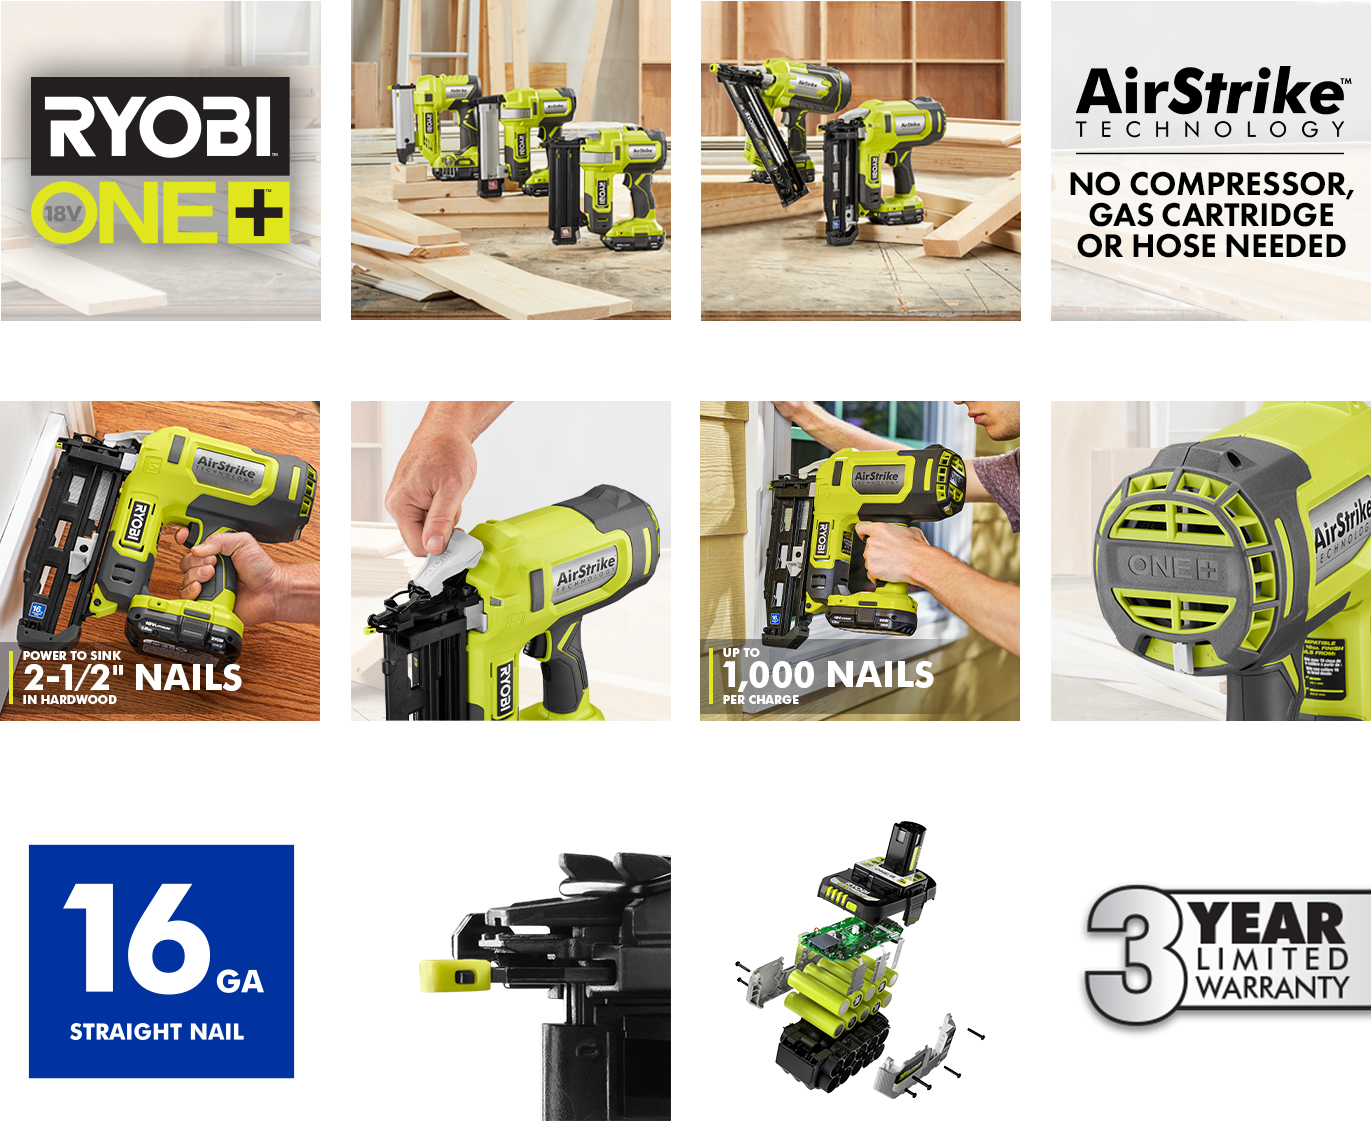 Ryobi AirStriker Nailer Rich Content Example of 12 images in a grid, for Home Depot's website